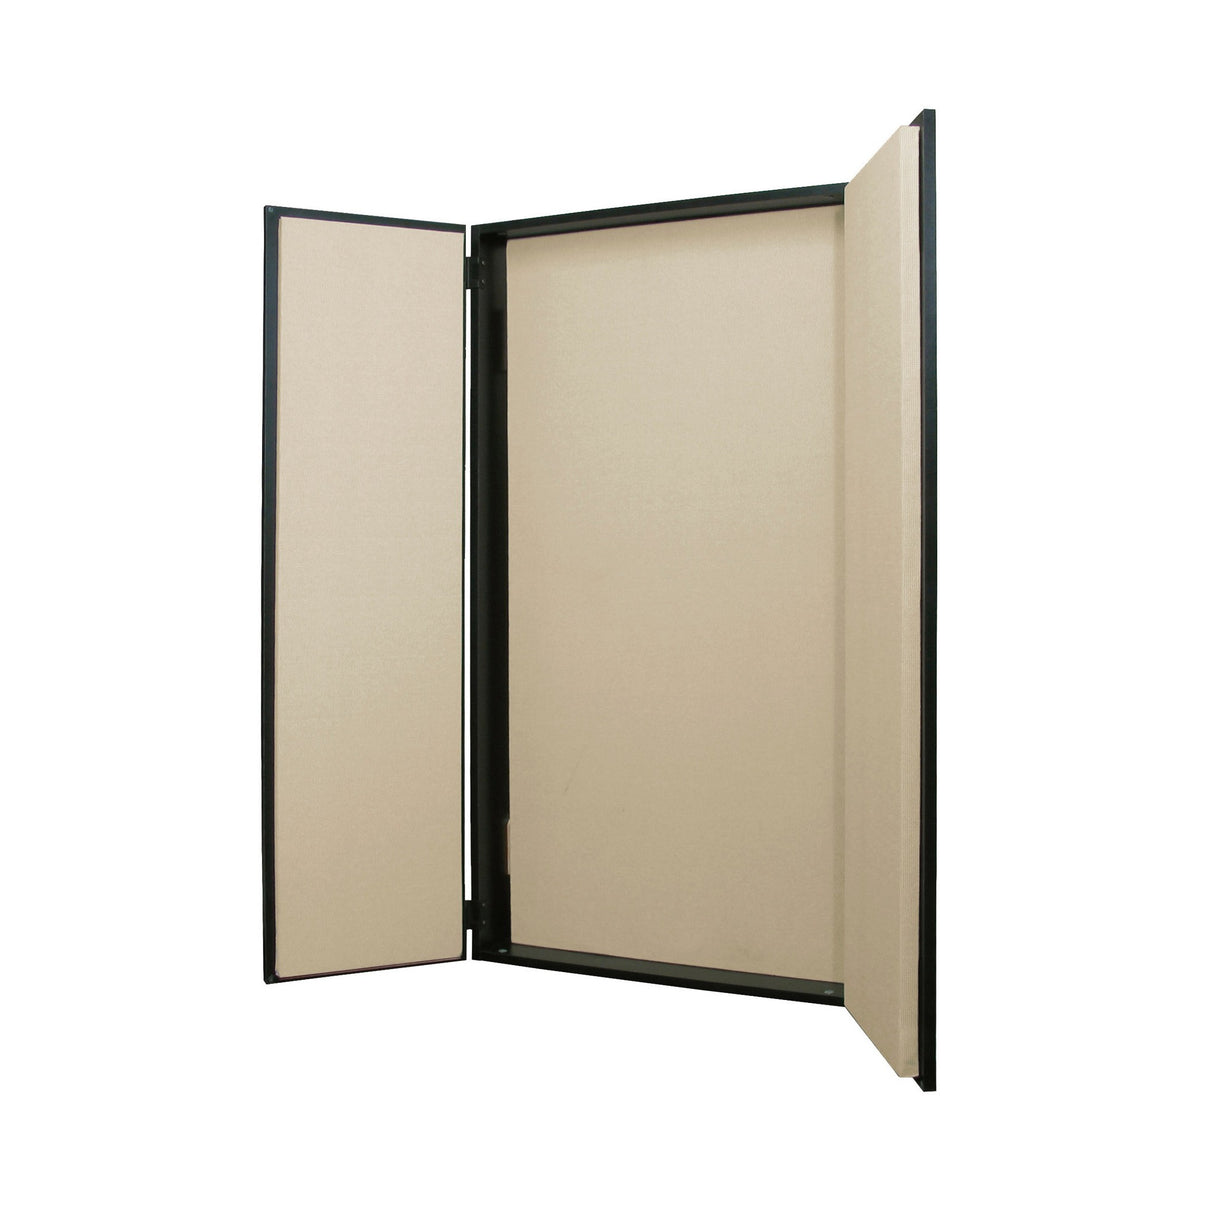 Primacoustic FlexiBooth 24 x 48 x 6-Inch Wall Mount Vocal Booth, Black/Beige